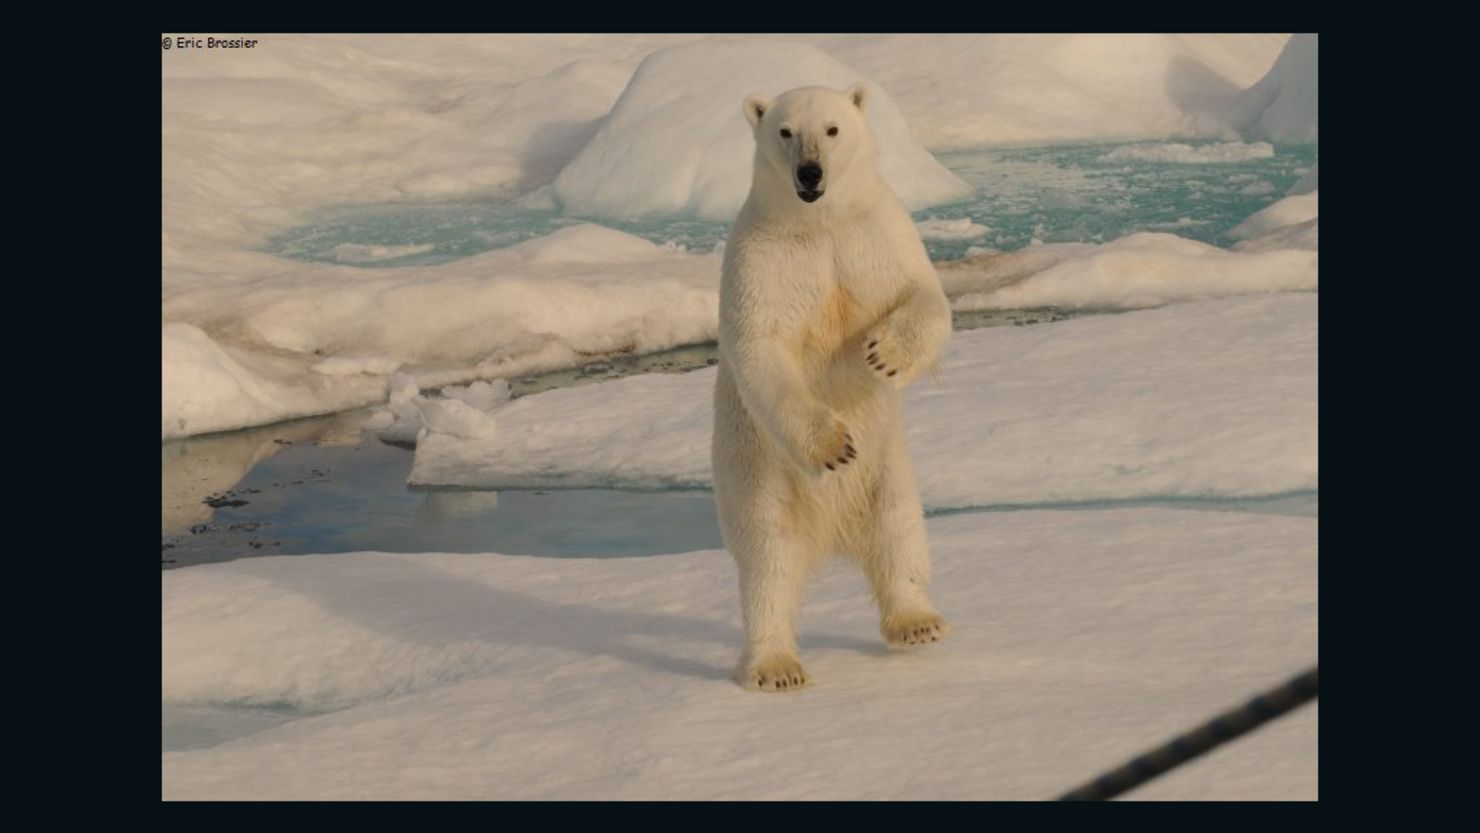 A polar bear approaches the boat of oceanographer Eric Brossier in the Canadian Arctic.